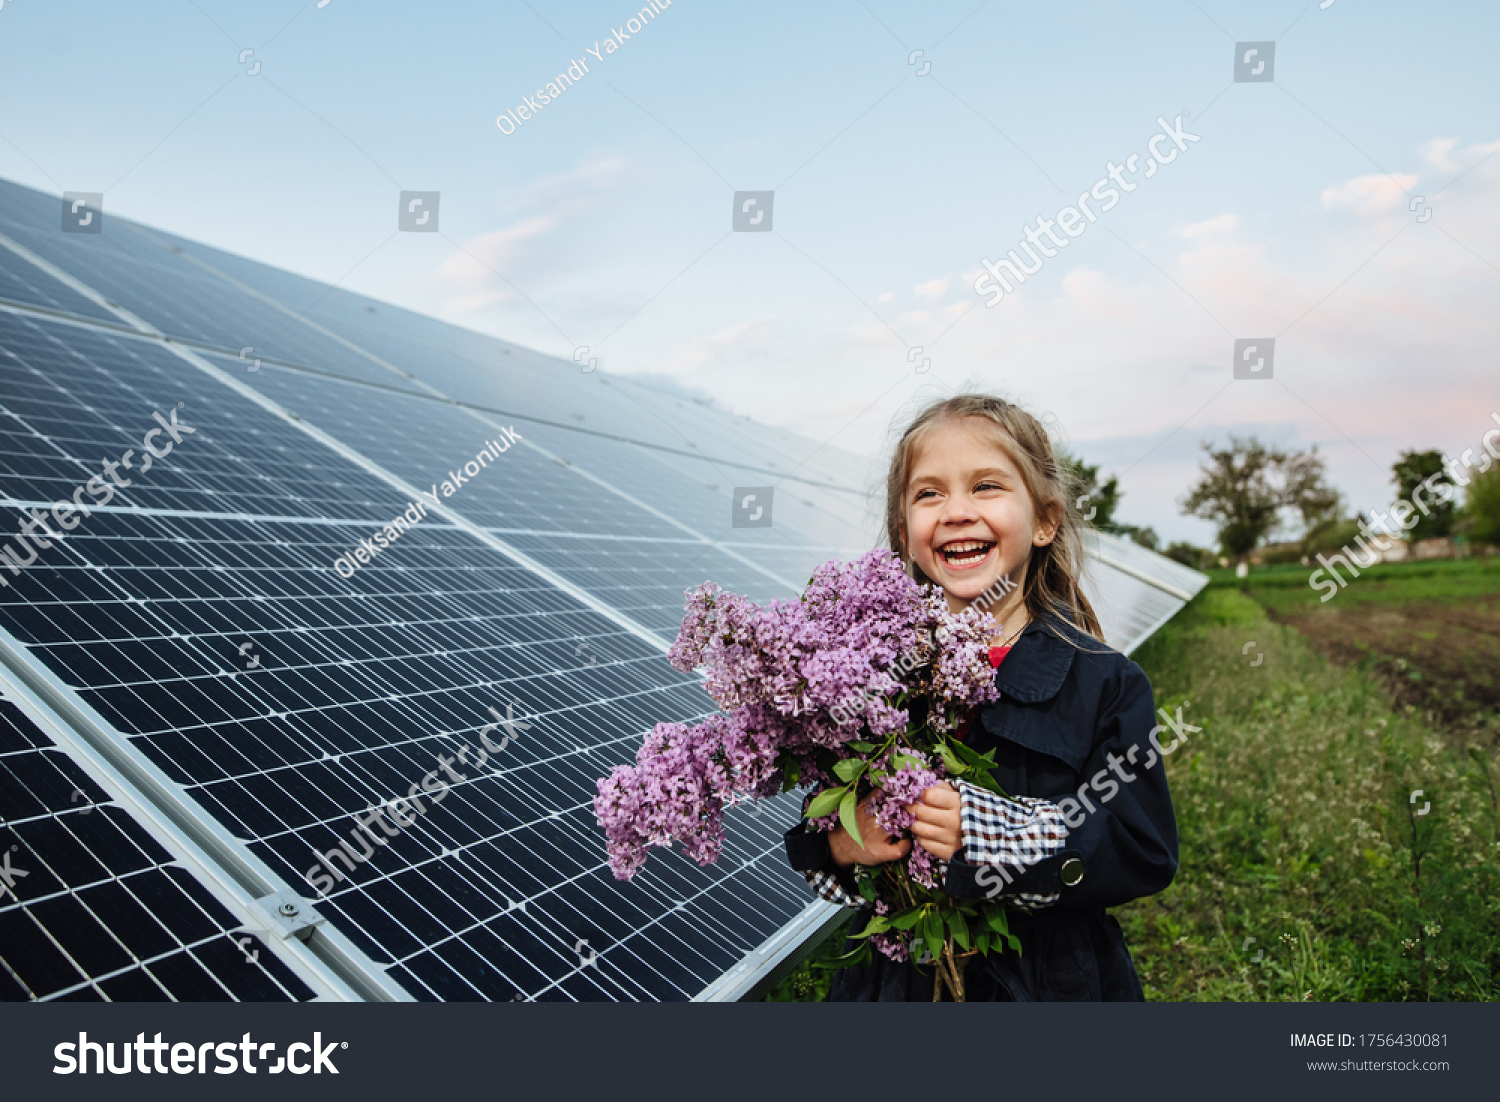 A child with a future of alternative energy and sustainable energy. The child holds flowers on a background of solar panels, photovoltaic. Environmental friendliness and clean energy concept. #1756430081